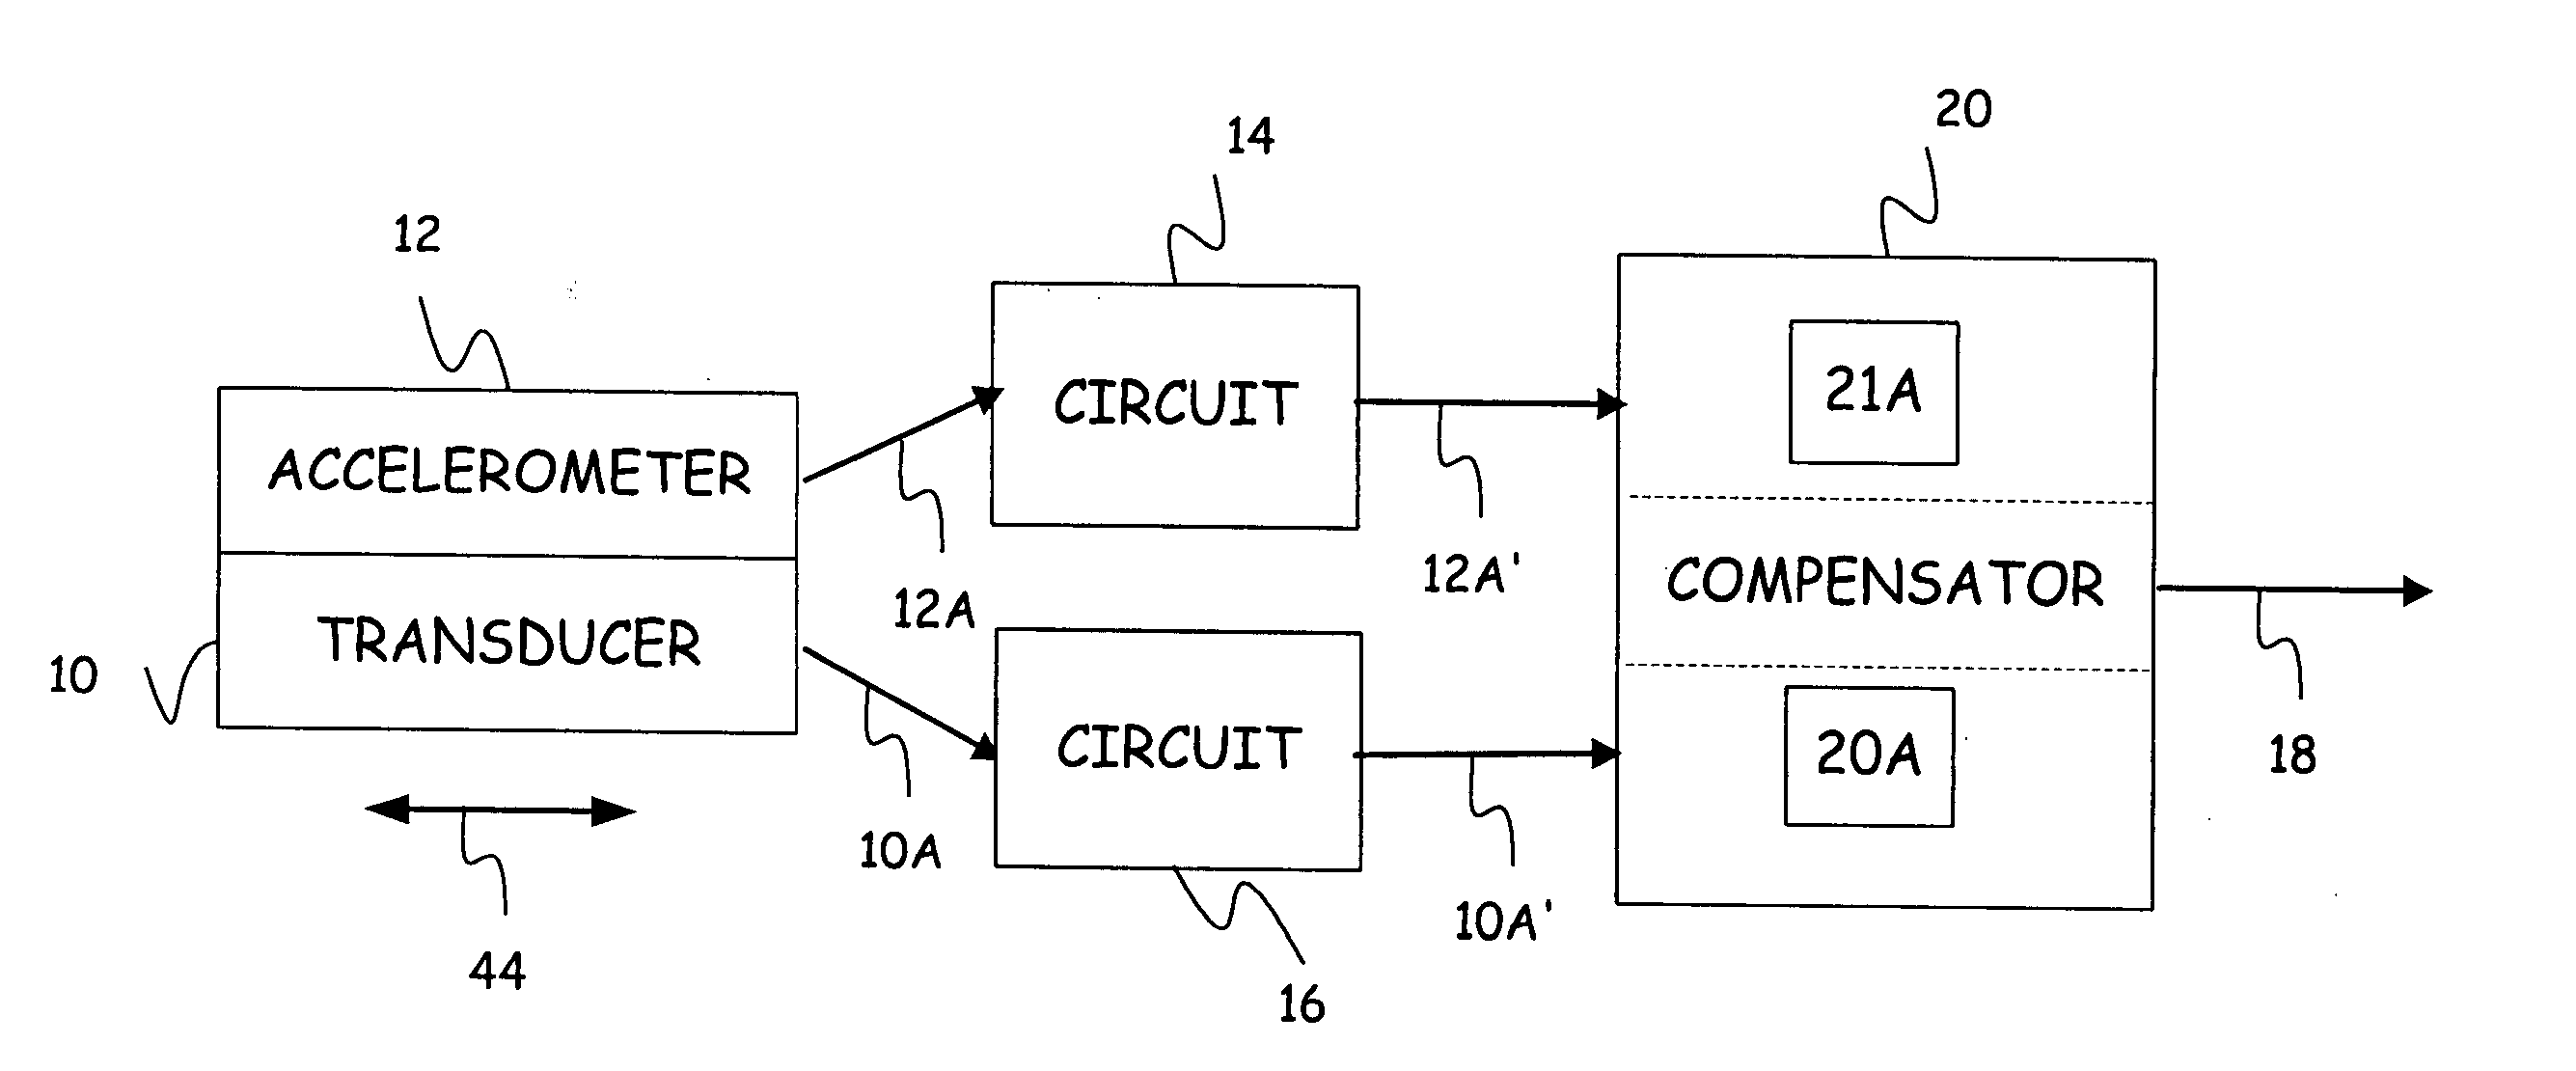 Transducer acceleration compensation with frequency domain amplitude and/or phase compensation